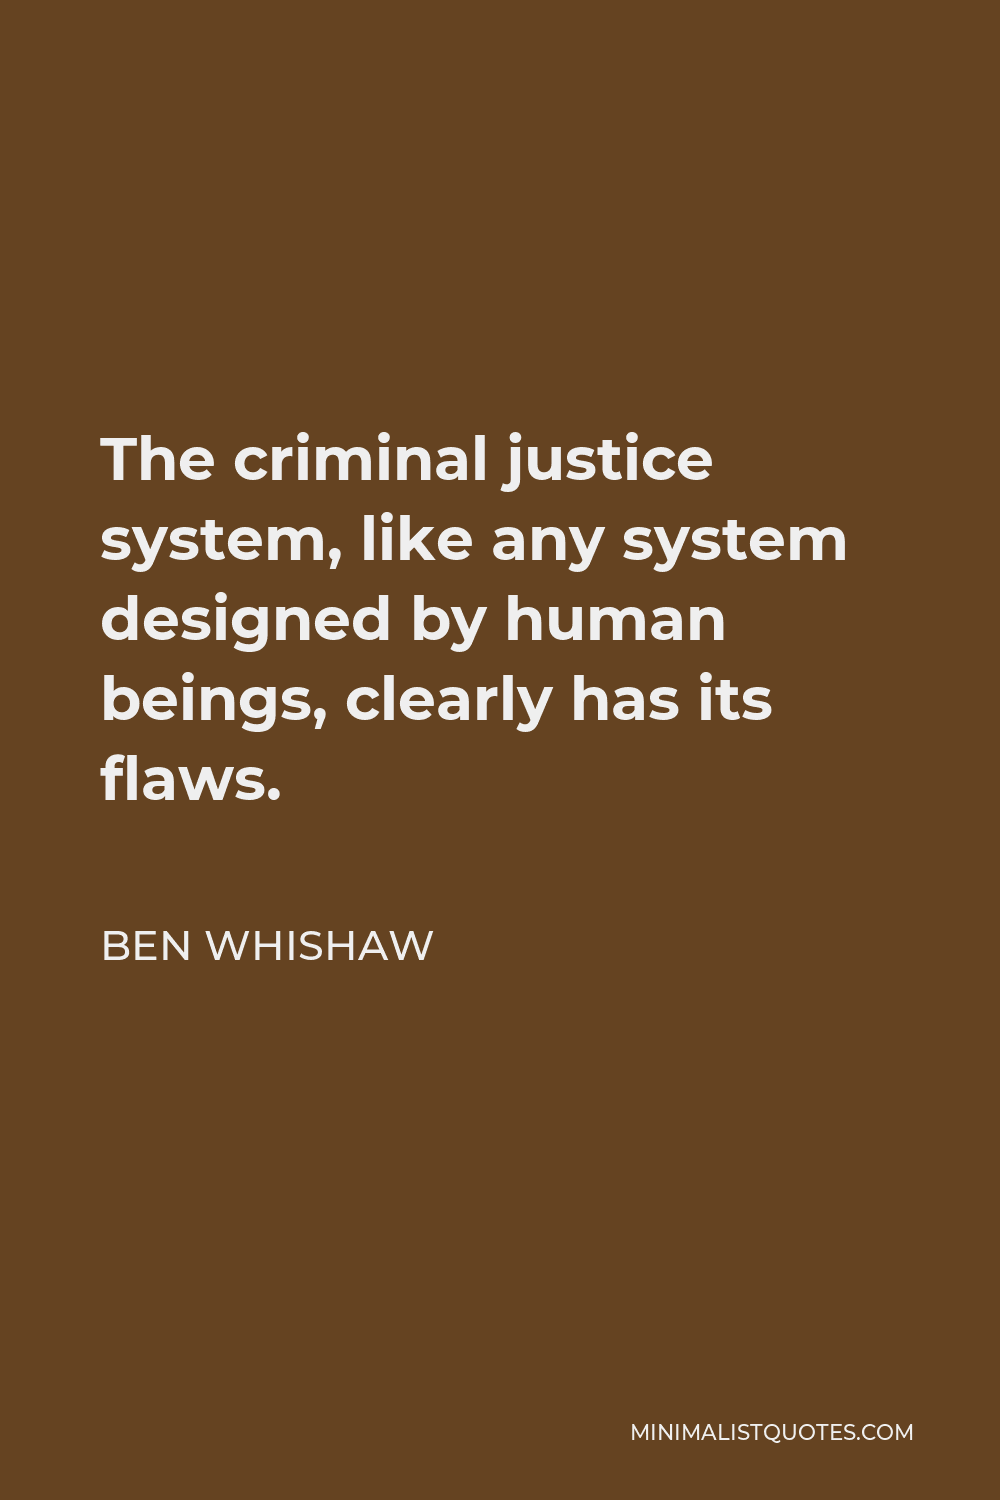 Ben Whishaw Quote - The criminal justice system, like any system designed by human beings, clearly has its flaws.